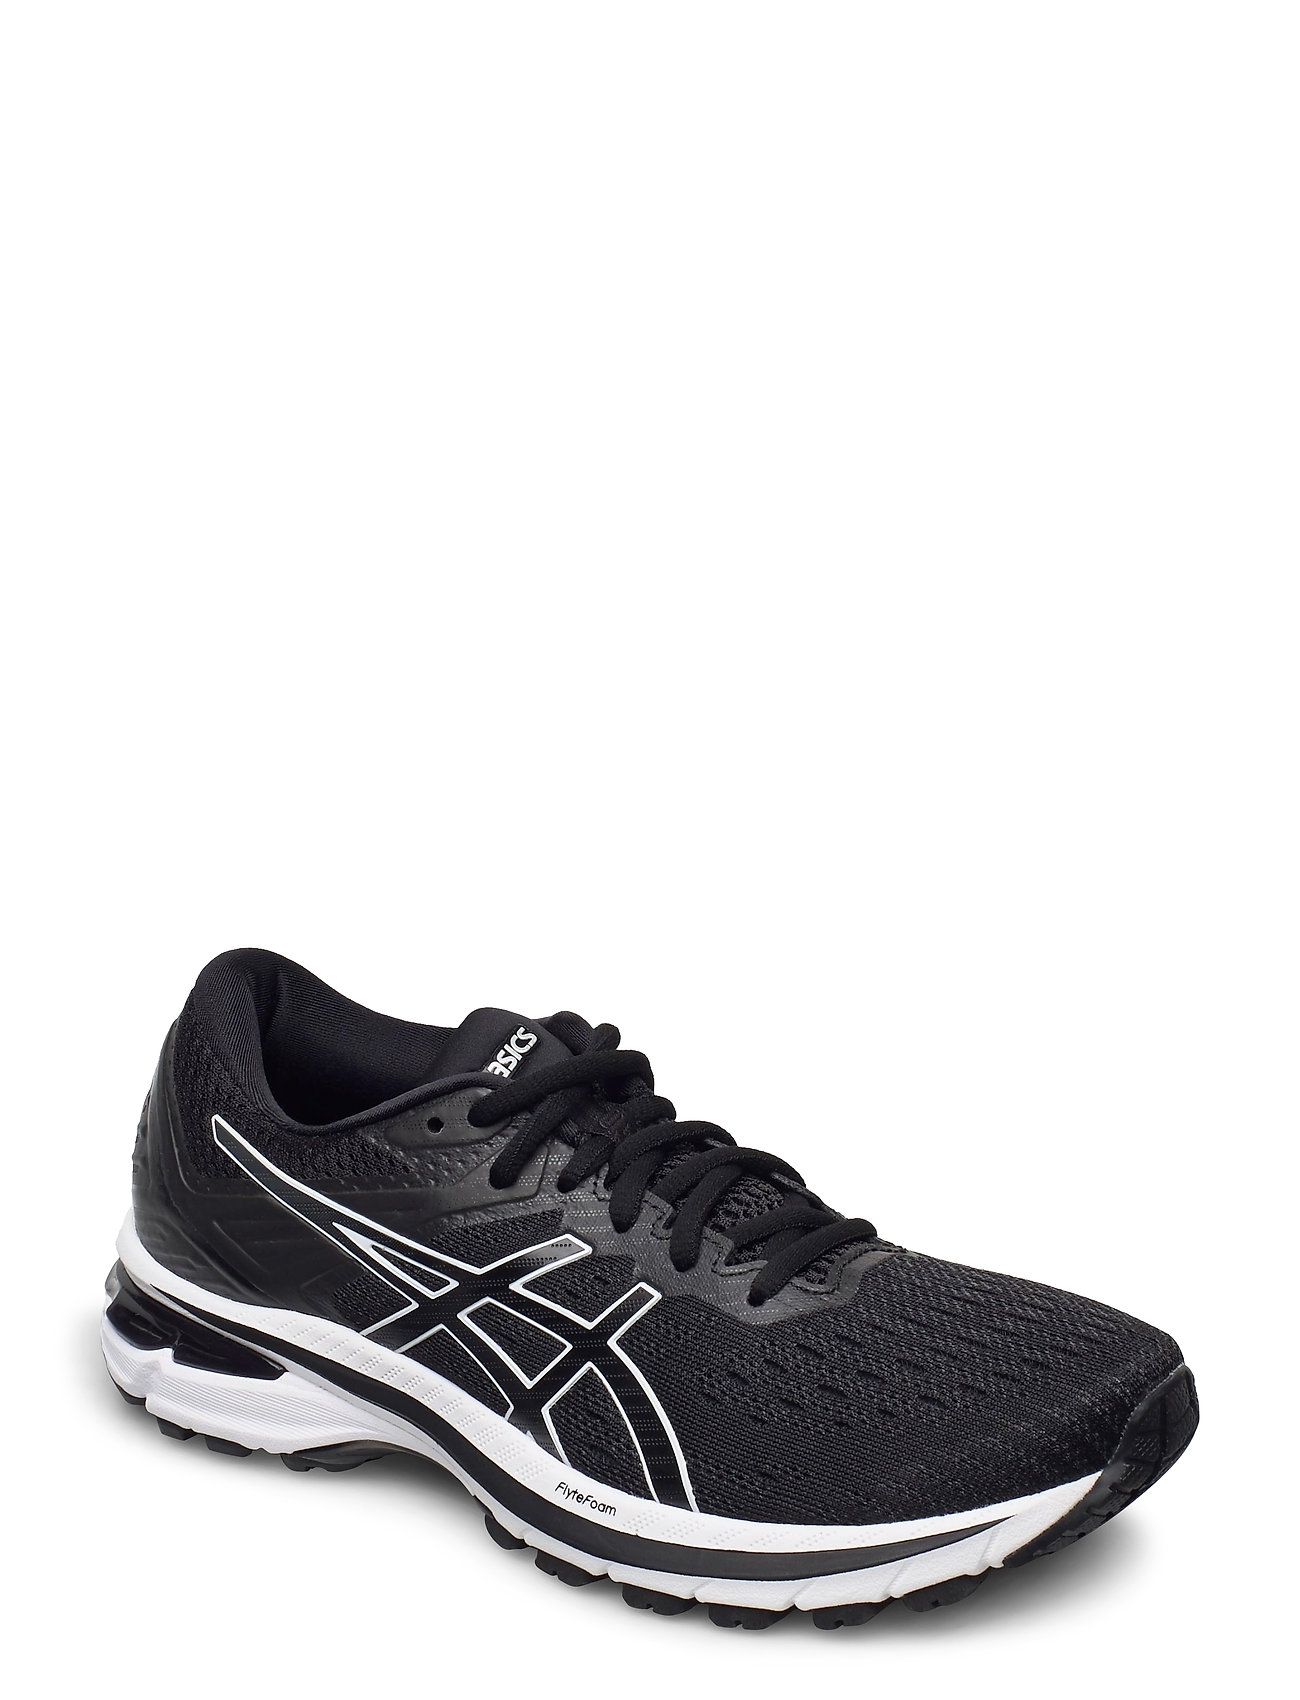 Gt-2000 9 Shoes Sport Shoes Running Shoes Musta Asics